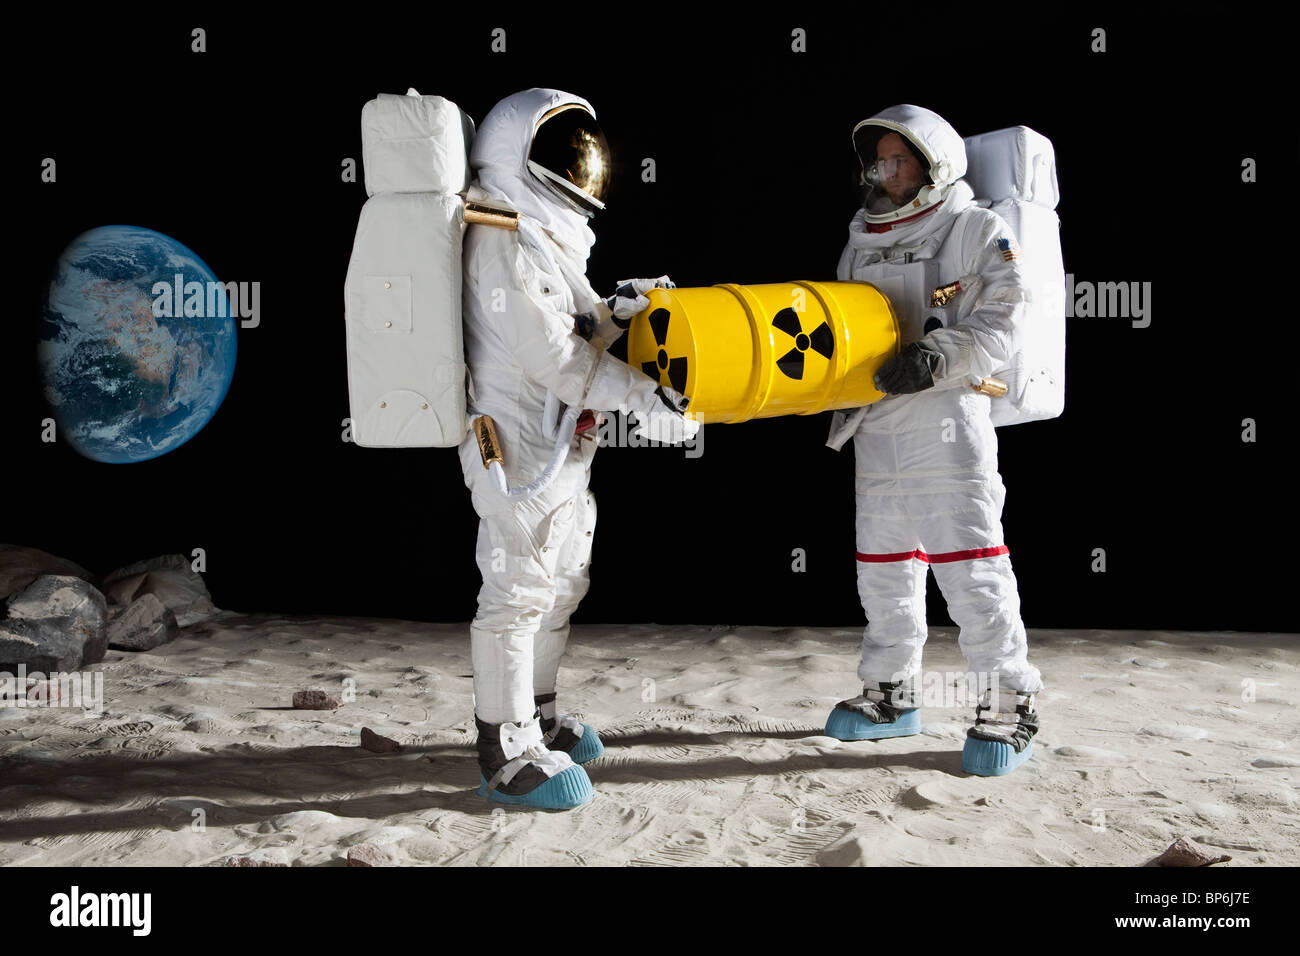 Two astronauts on the moon surface carrying a drum of toxic material Stock Photo